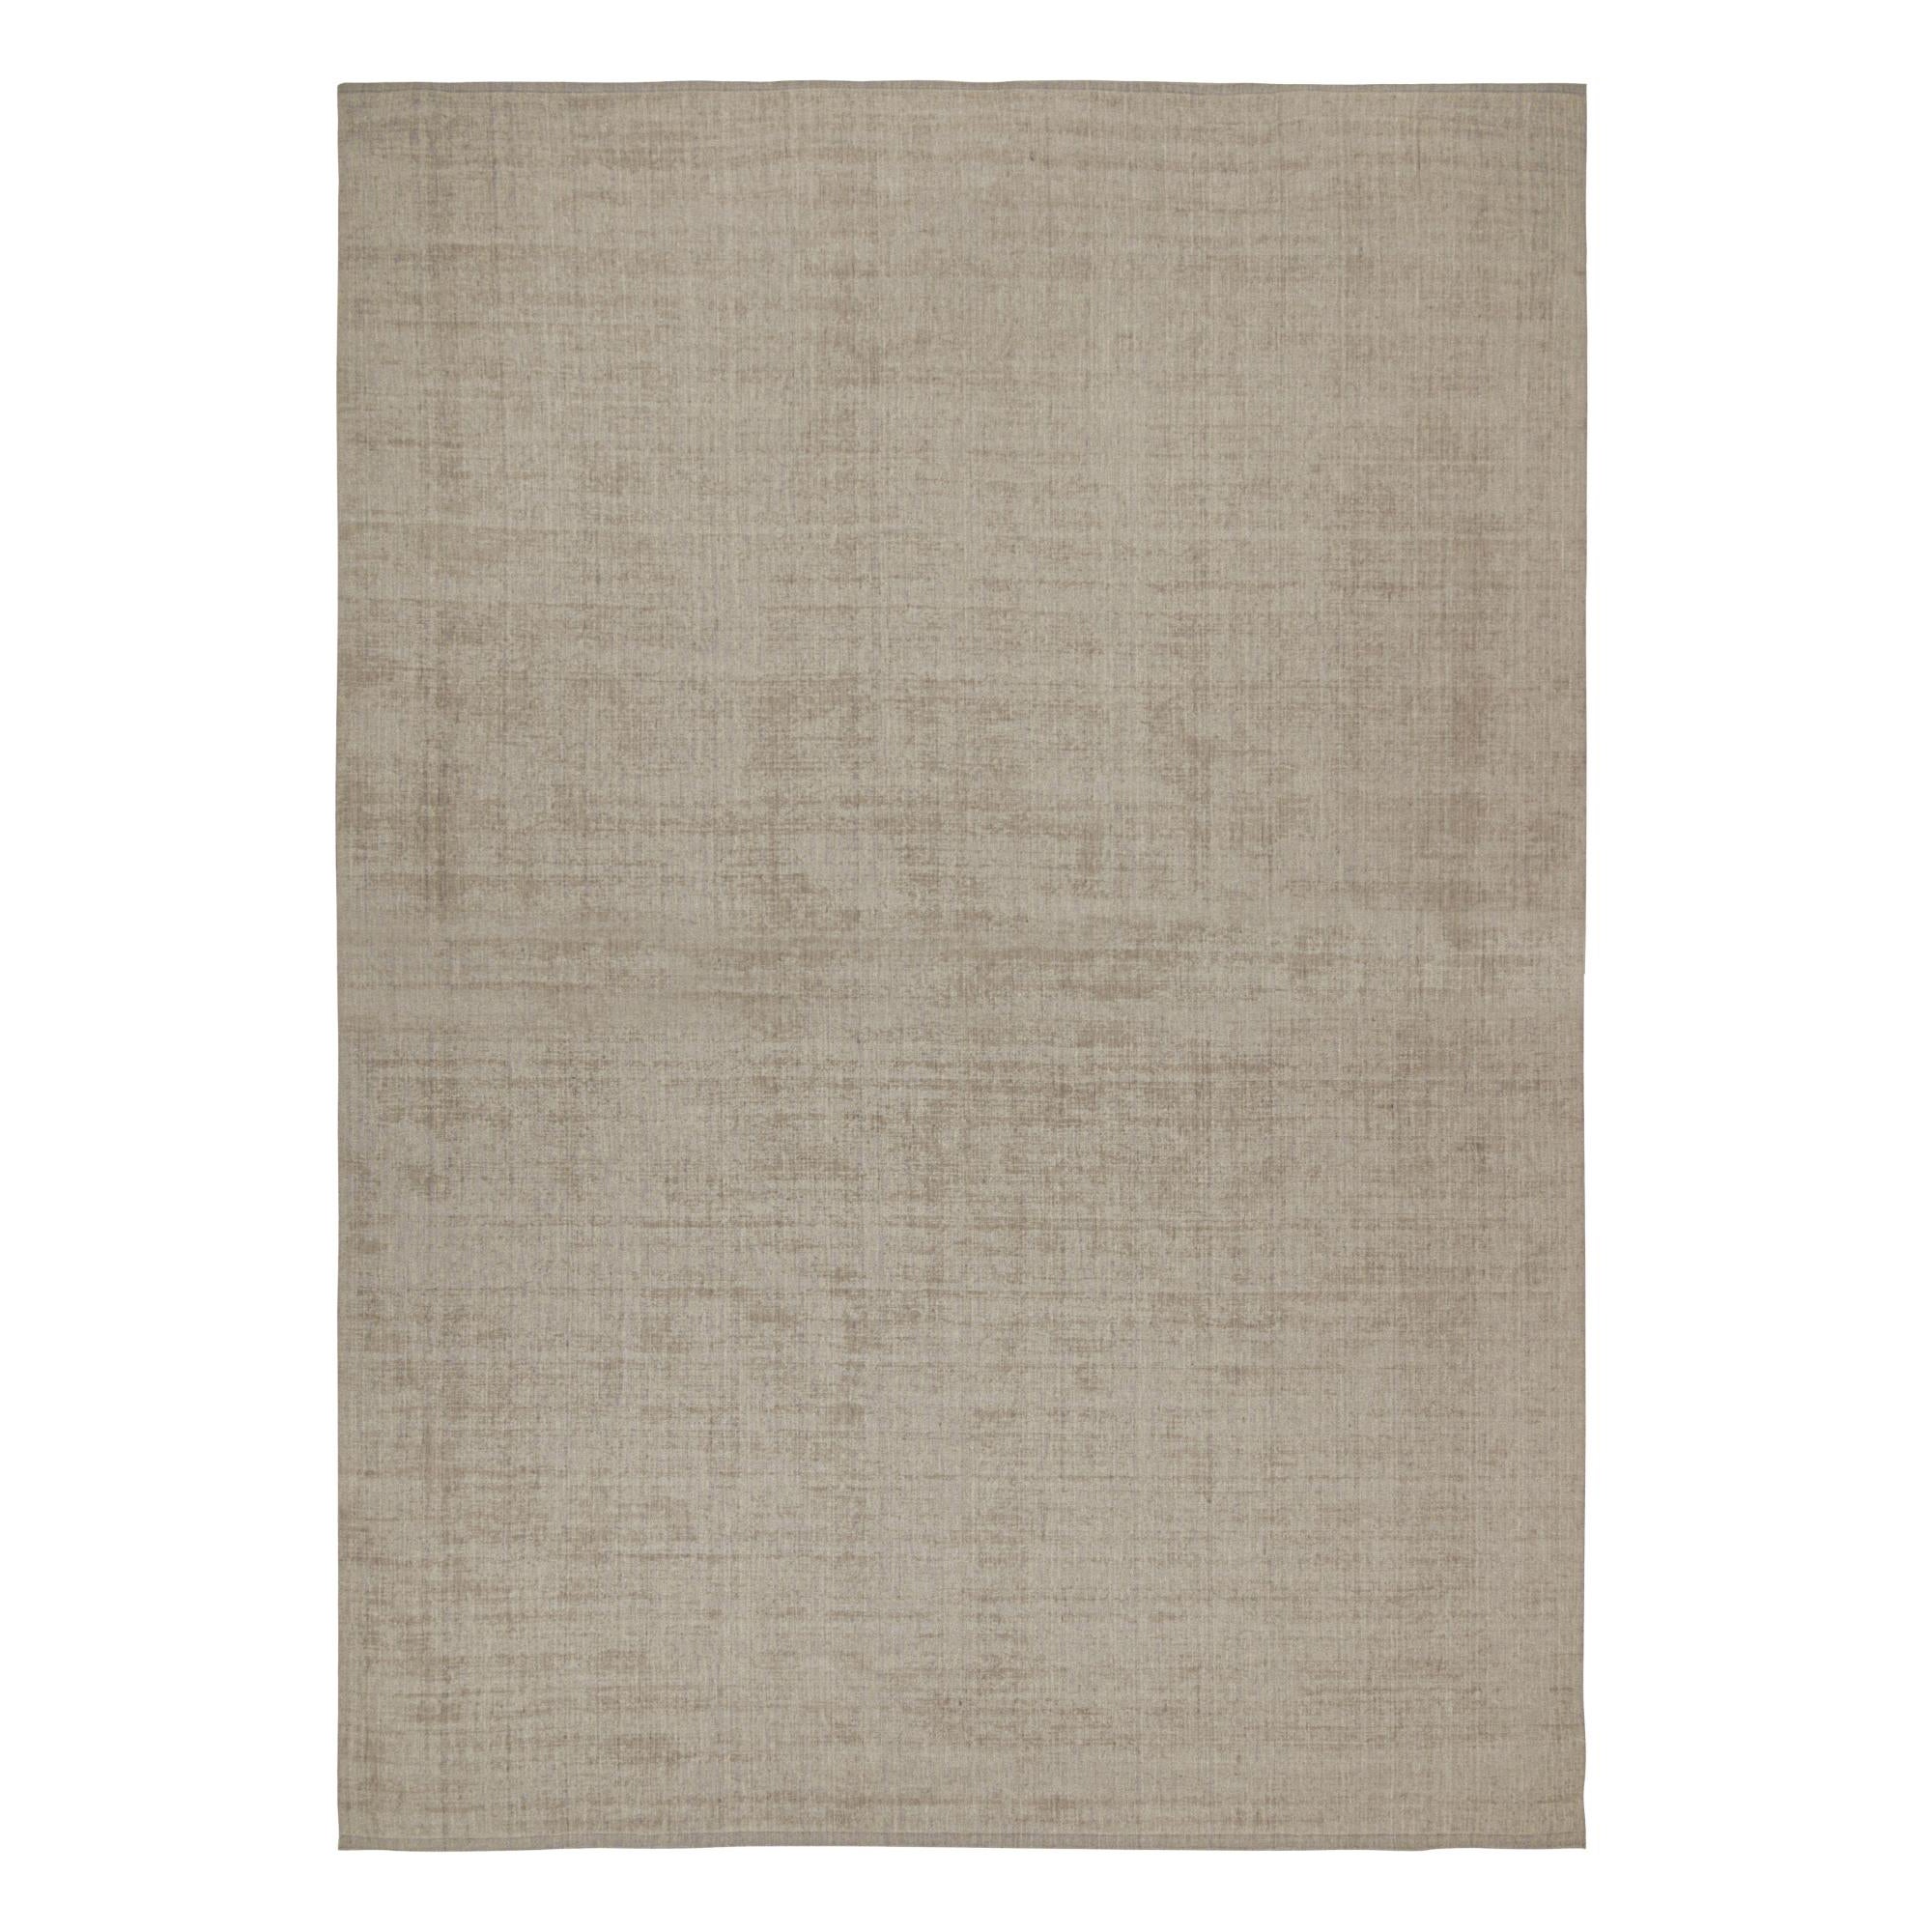 Rug & Kilim’s Contemporary rug in Taupe with Tone-on-Tone Striae